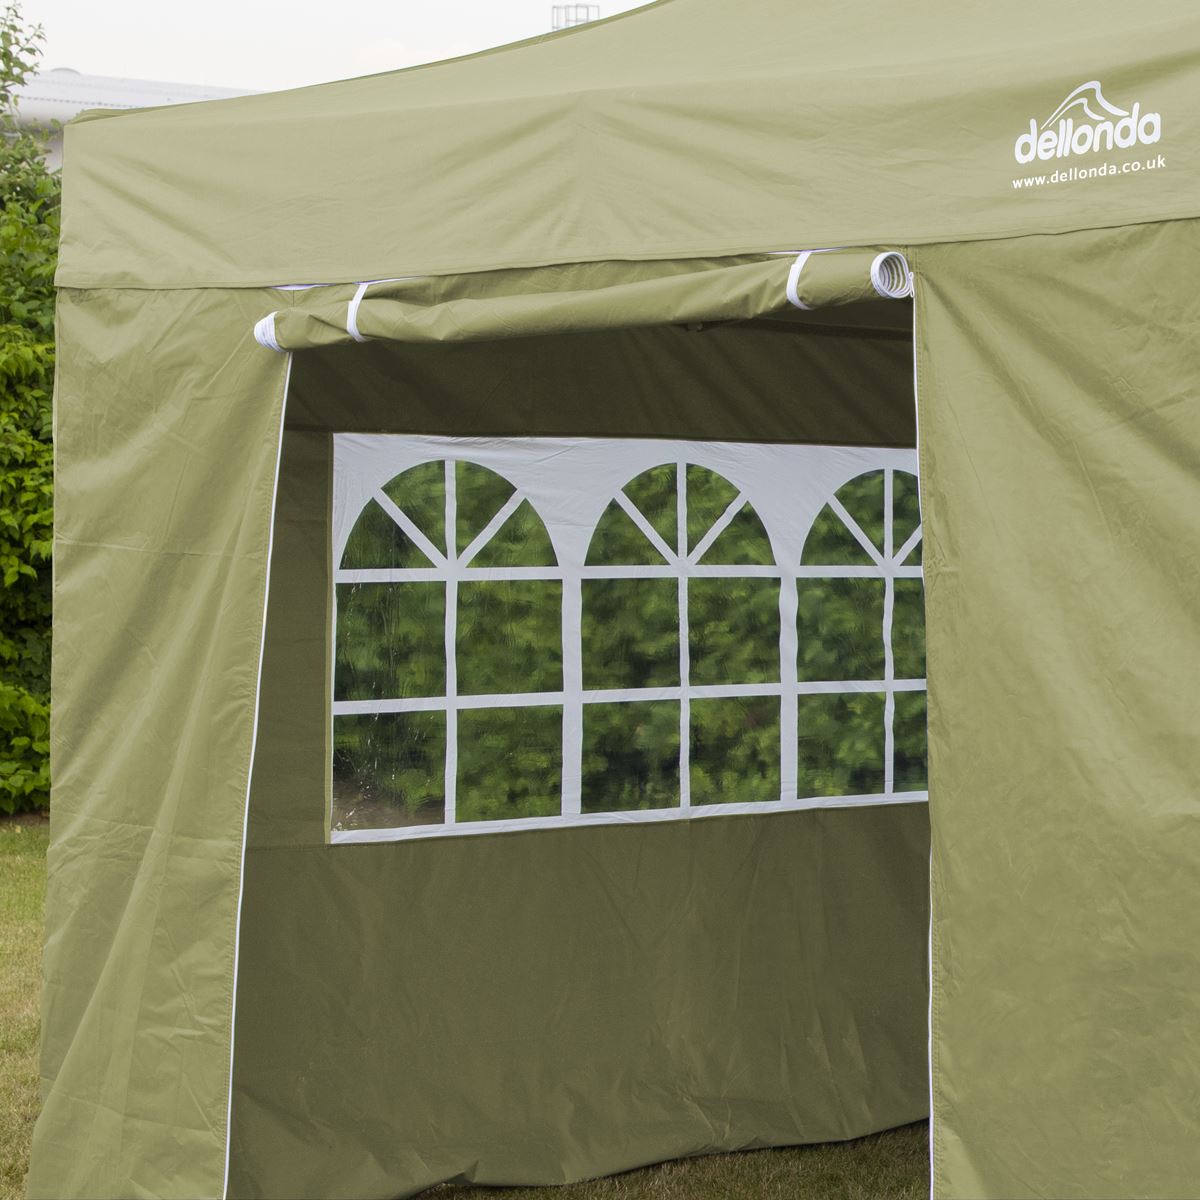 Dellonda Premium 3x3m Pop-Up Gazebo & Side Walls, PVC Coated, Water Resistant Fabric with Carry Bag, Rope, Stakes & Weight Bags - Beige